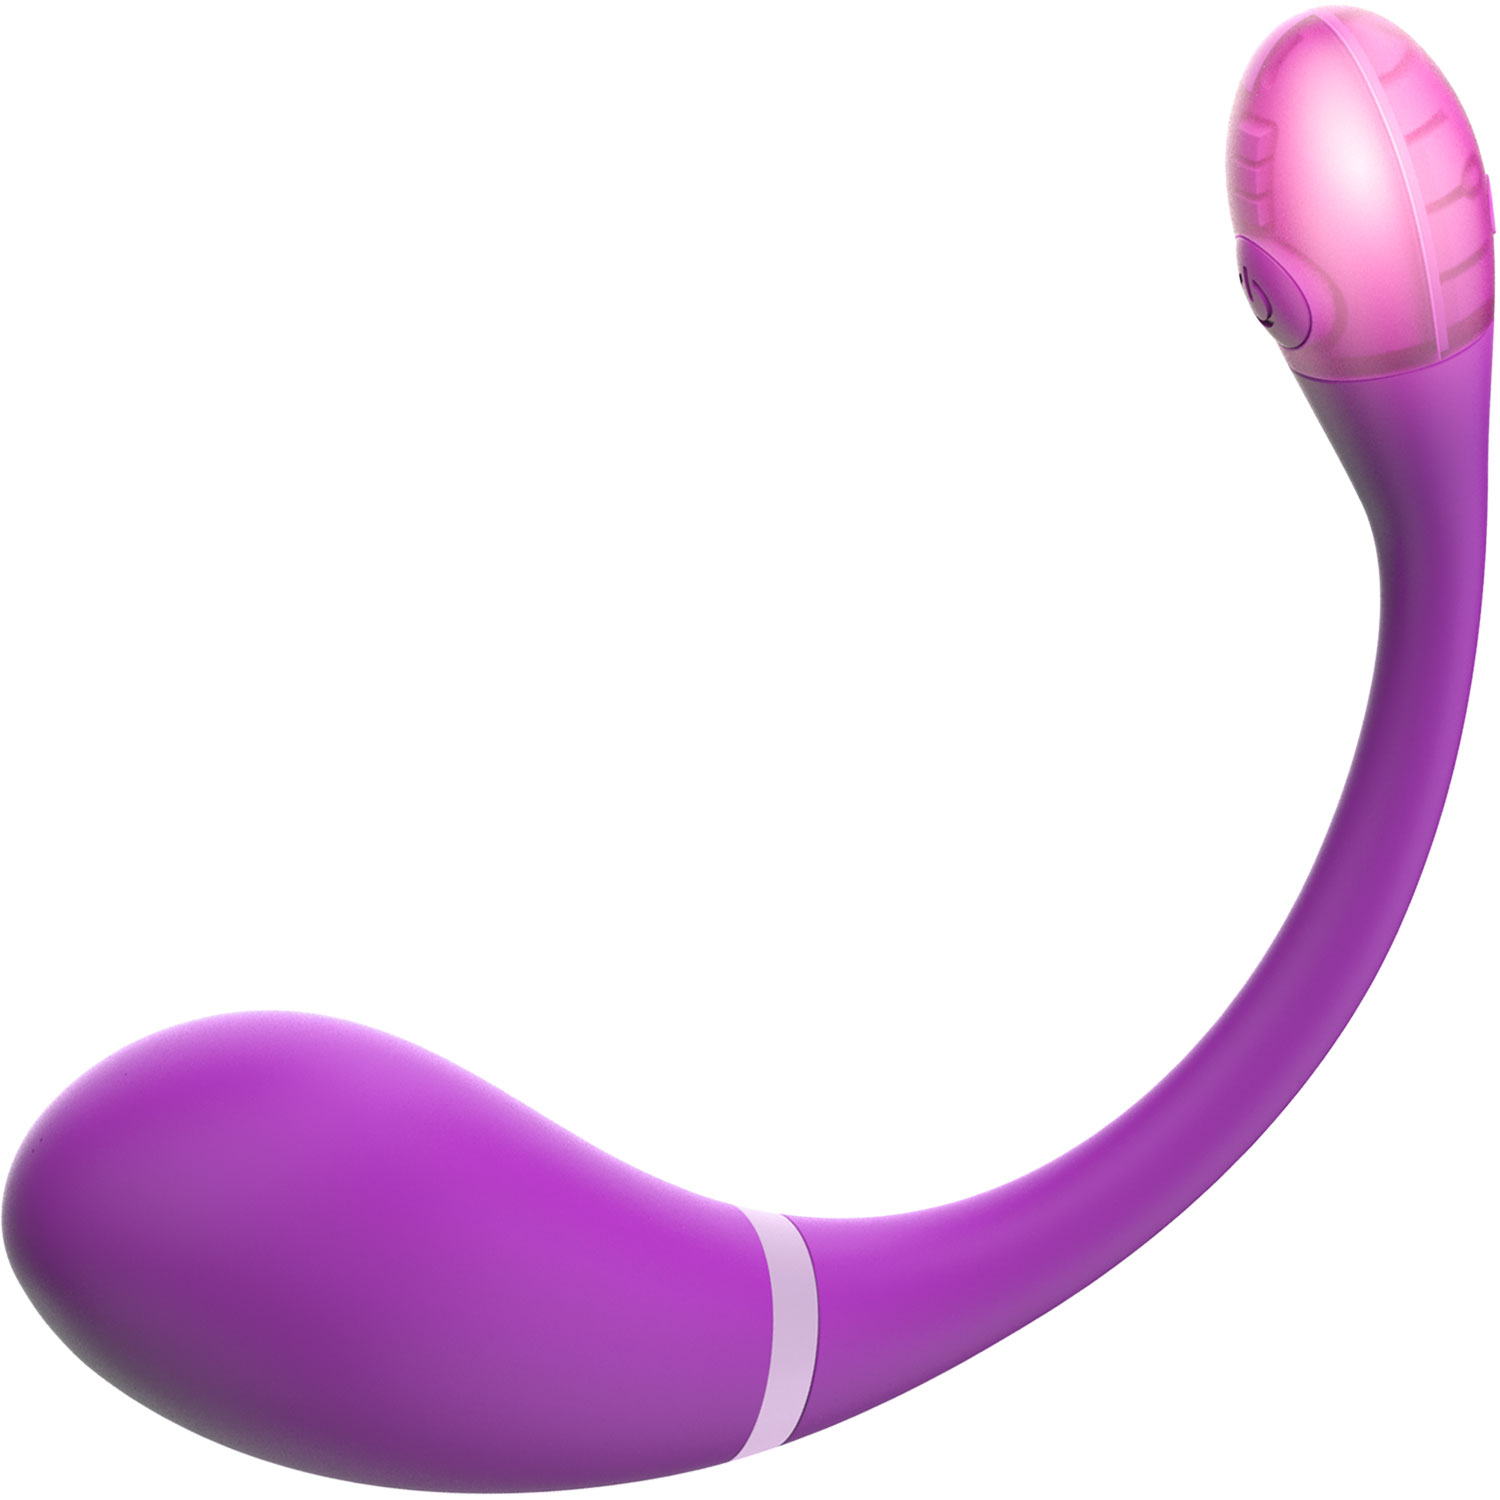 Esca 2 Interactive Bluetooth App Controlled G-Spot Vibrator - Lighted Image